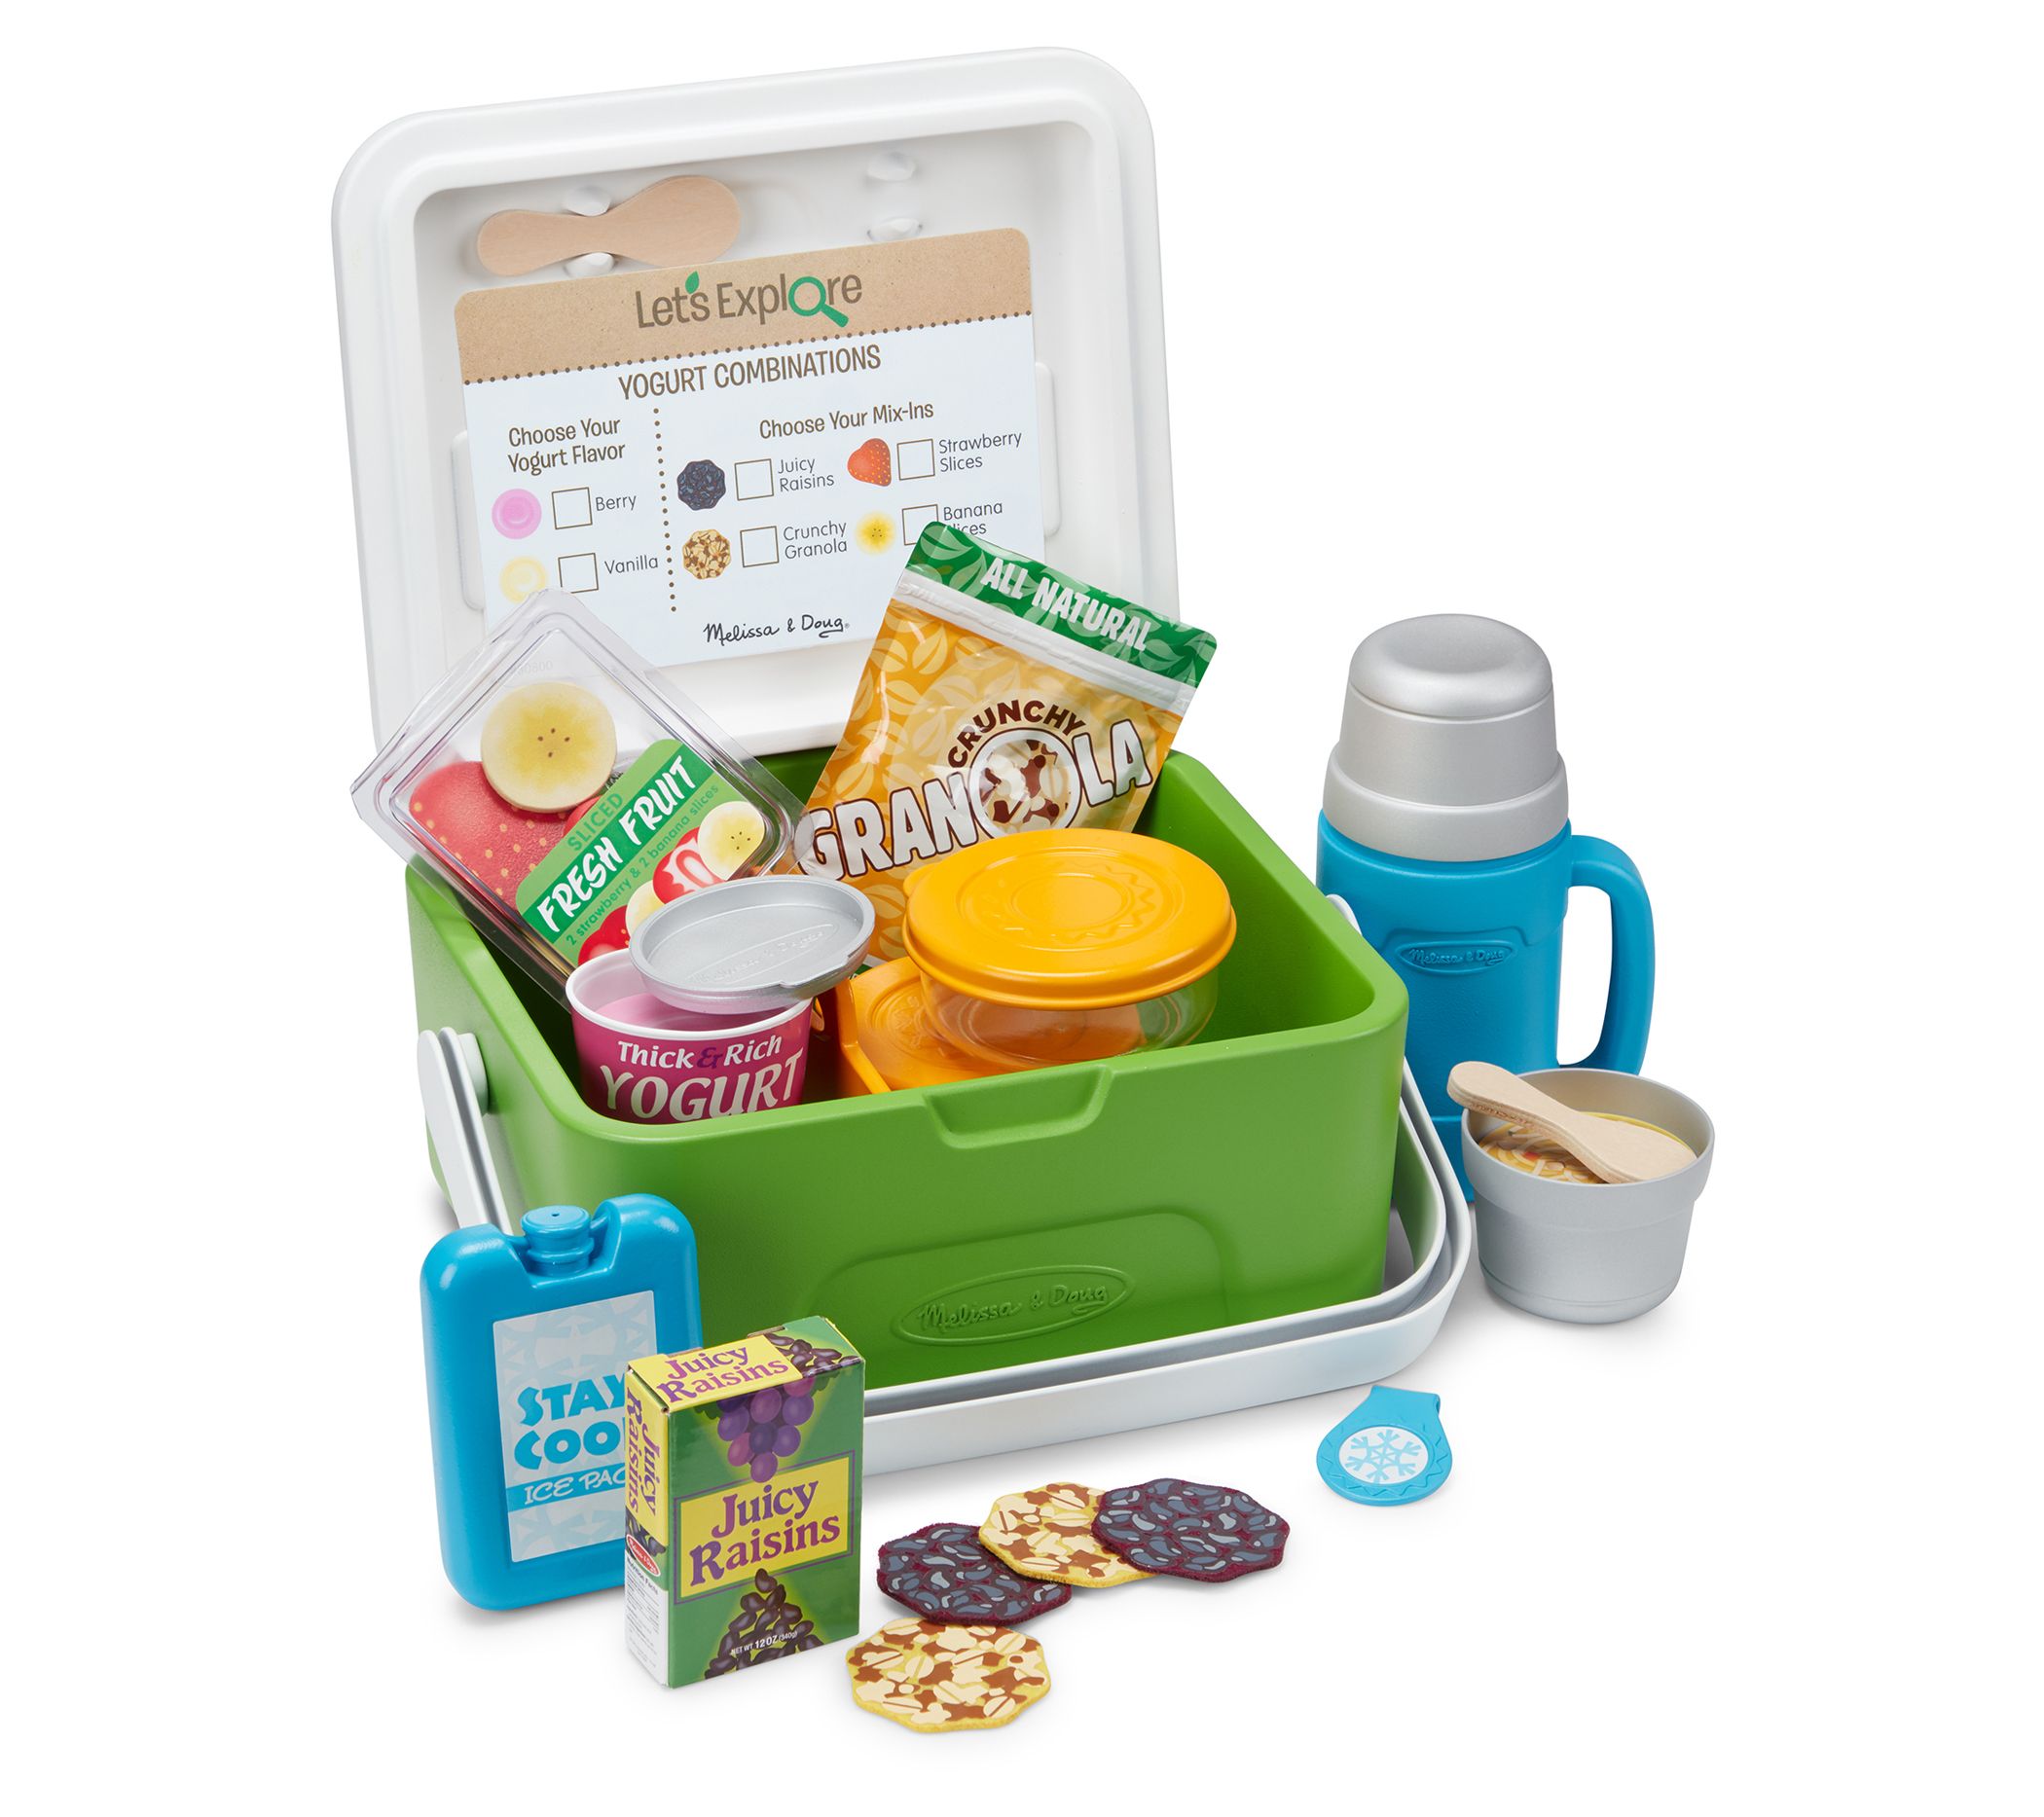 Kids Cooking And Baking Gift Sets With Storage Box - Complete Cooking  Supplies For Beginner Chefs - Kids Baking Sets For Girls And Boys - Real  Accesso